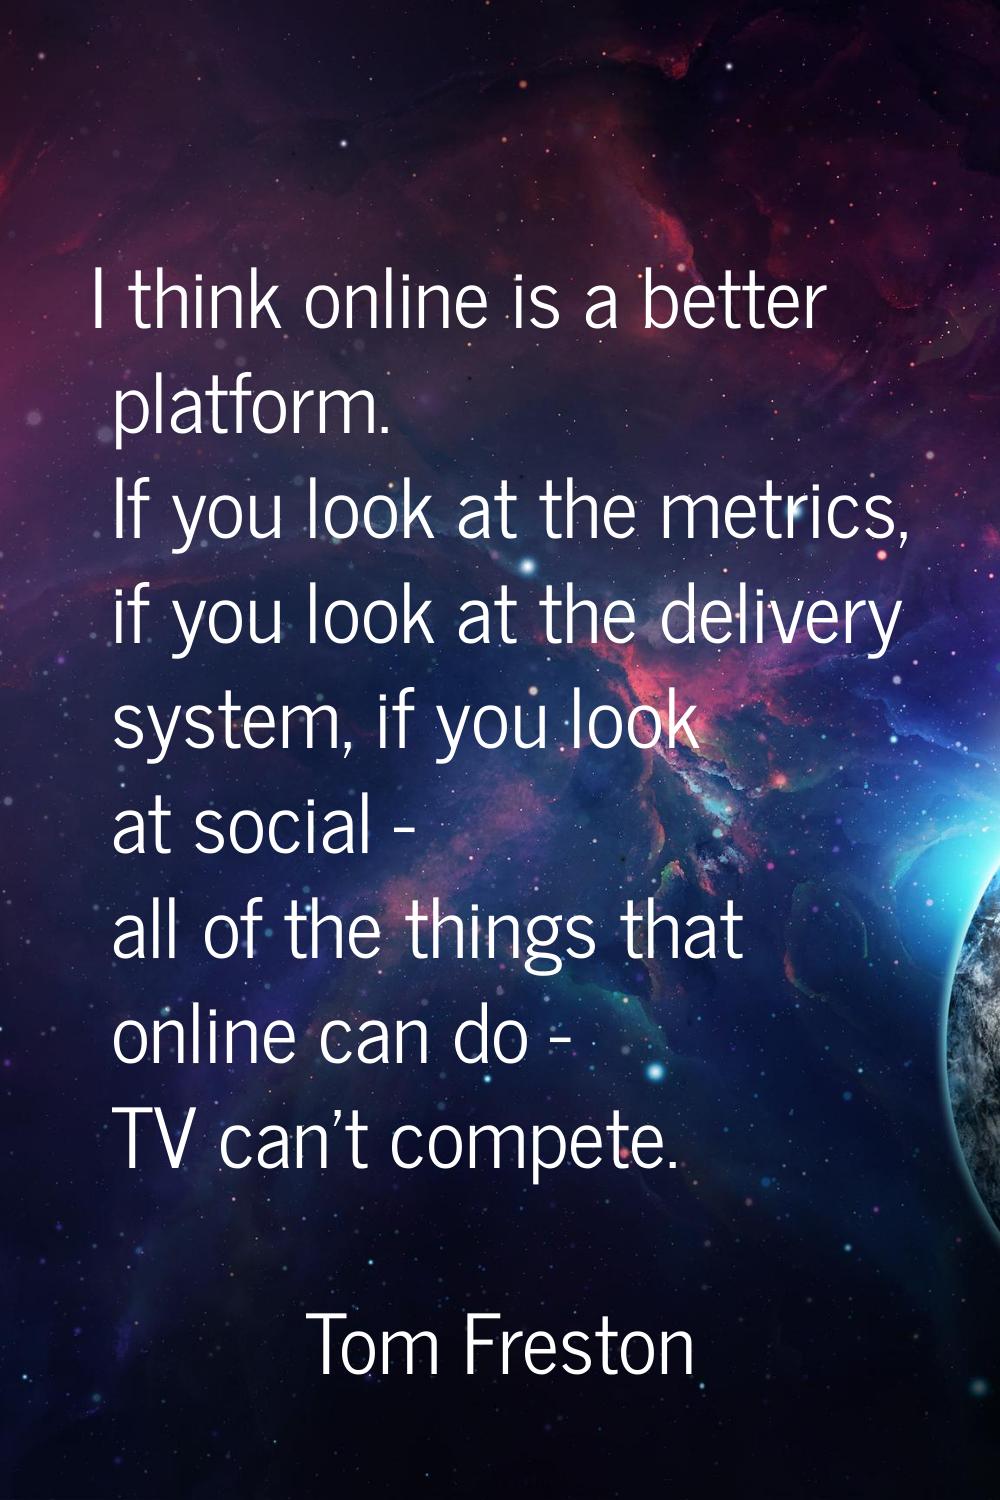 I think online is a better platform. If you look at the metrics, if you look at the delivery system